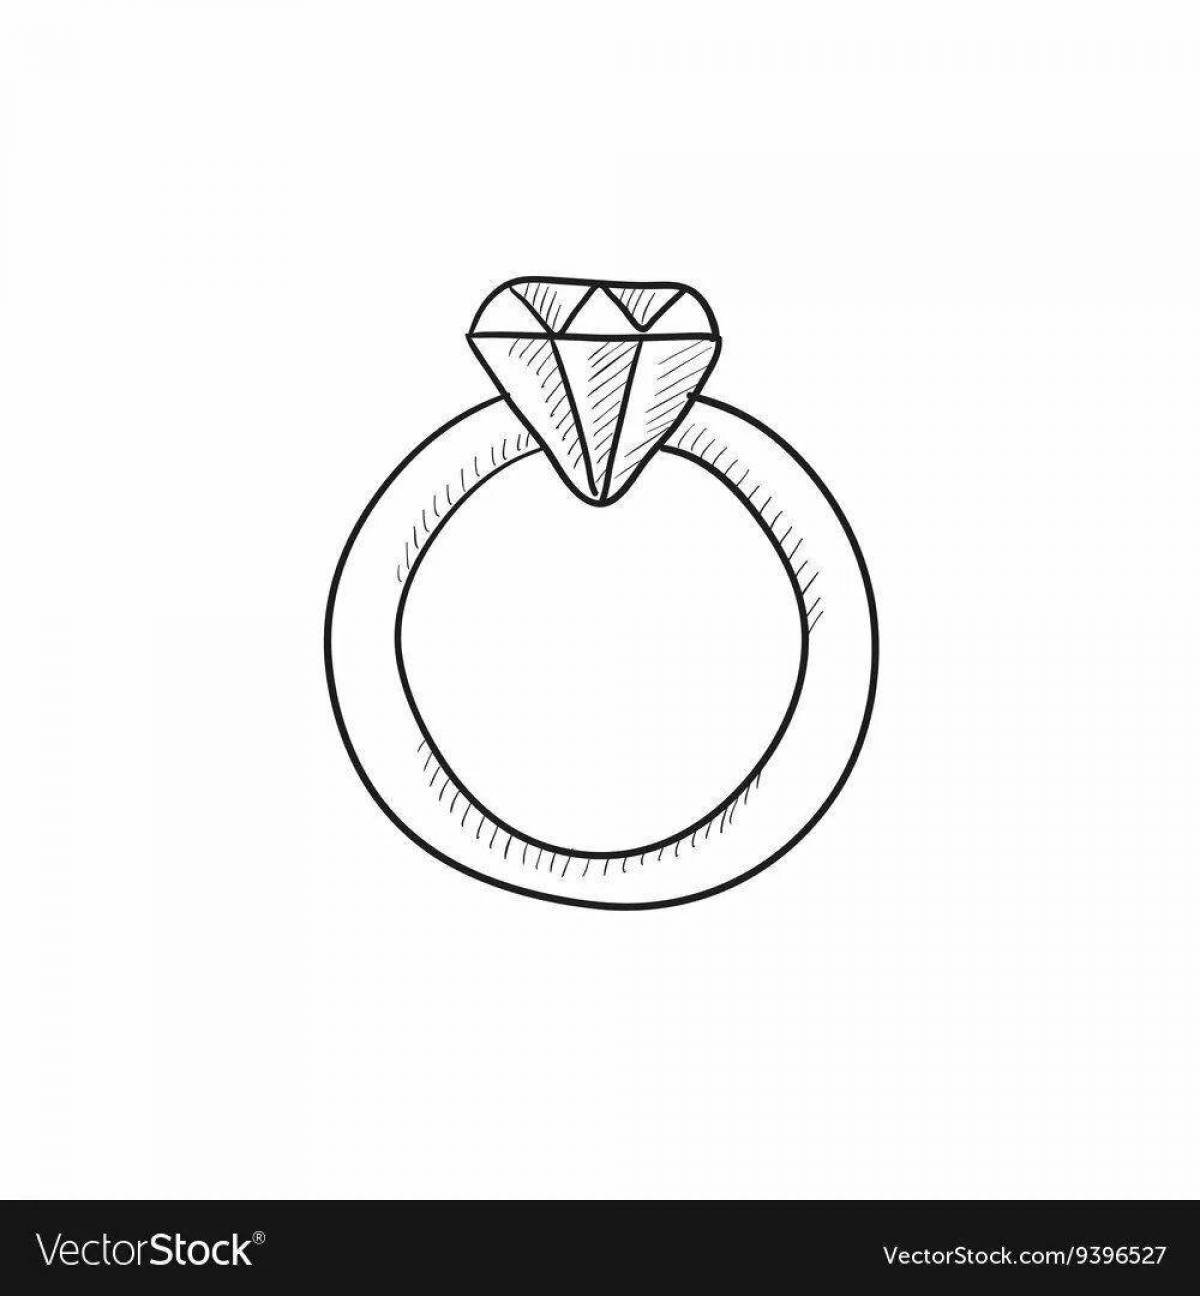 Coloring page elegant ring with a stone